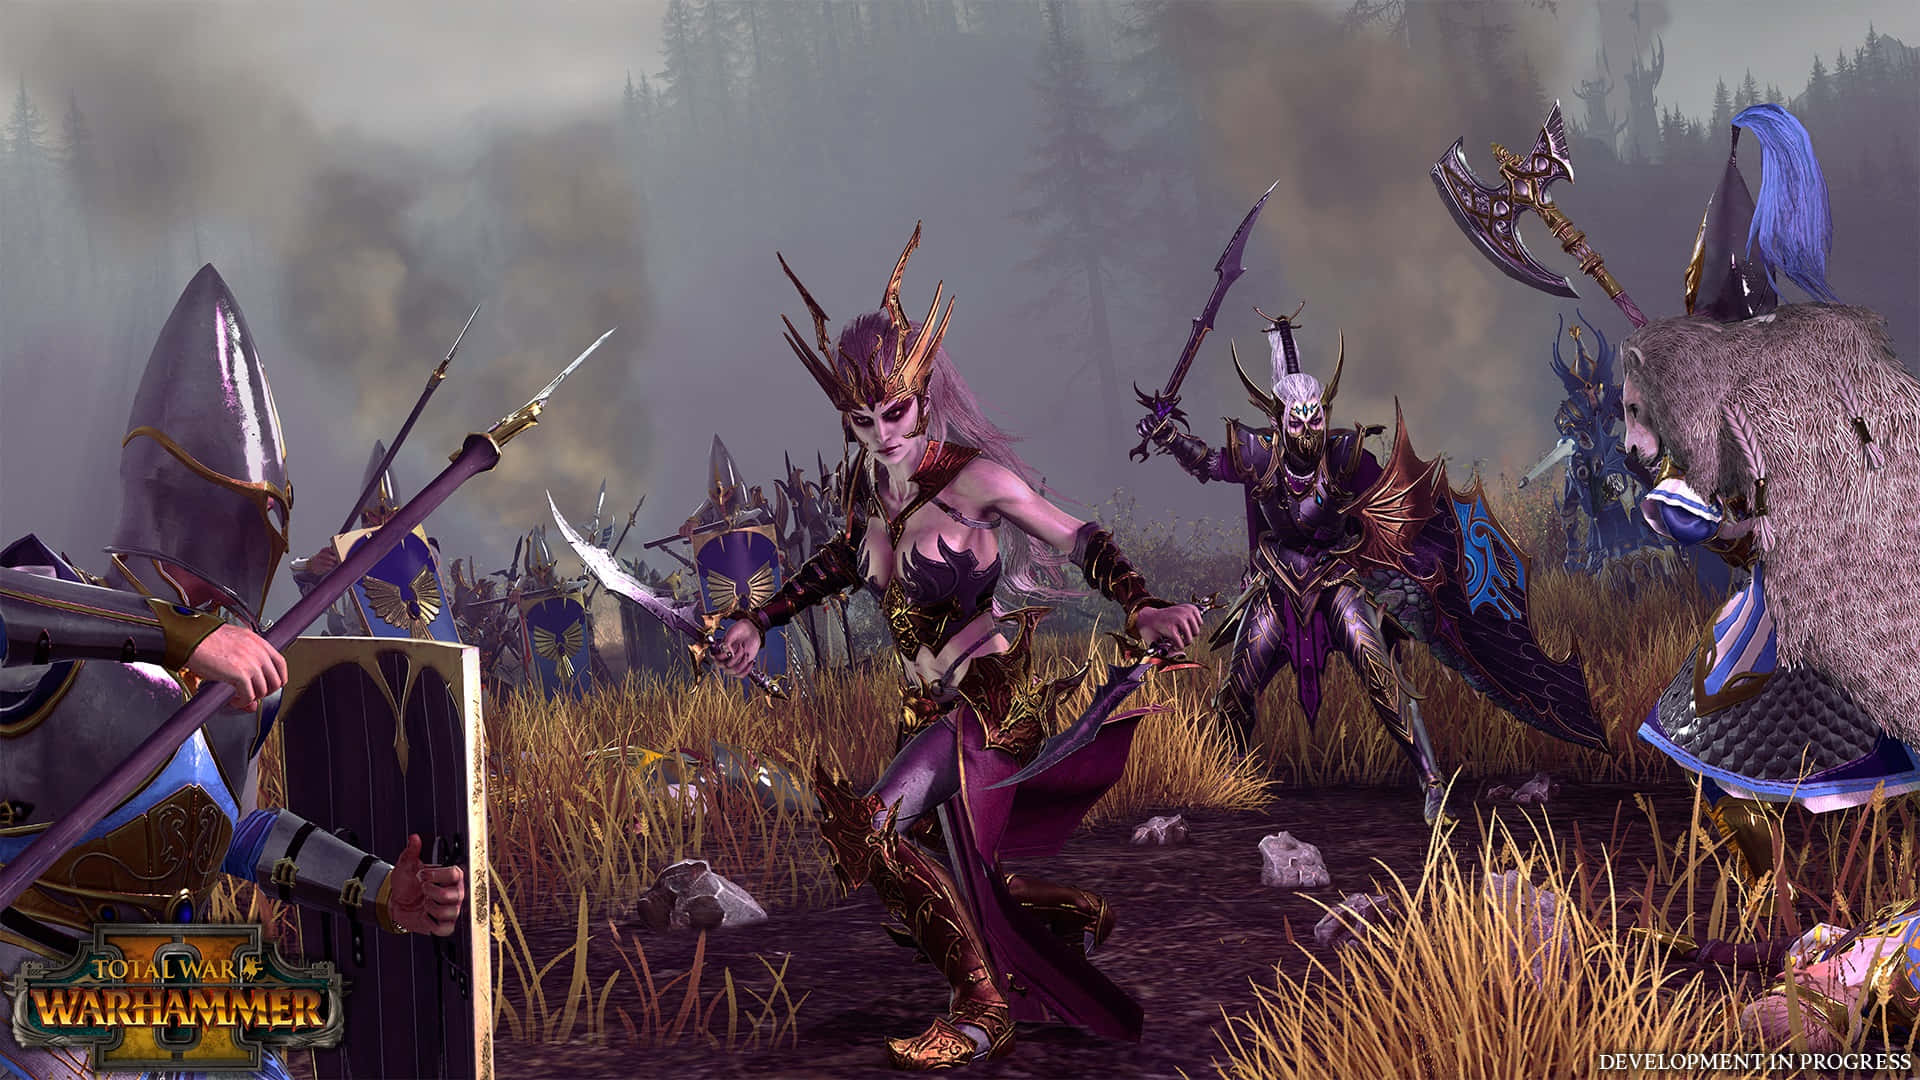 Conquer the world in Total War Warhammer II